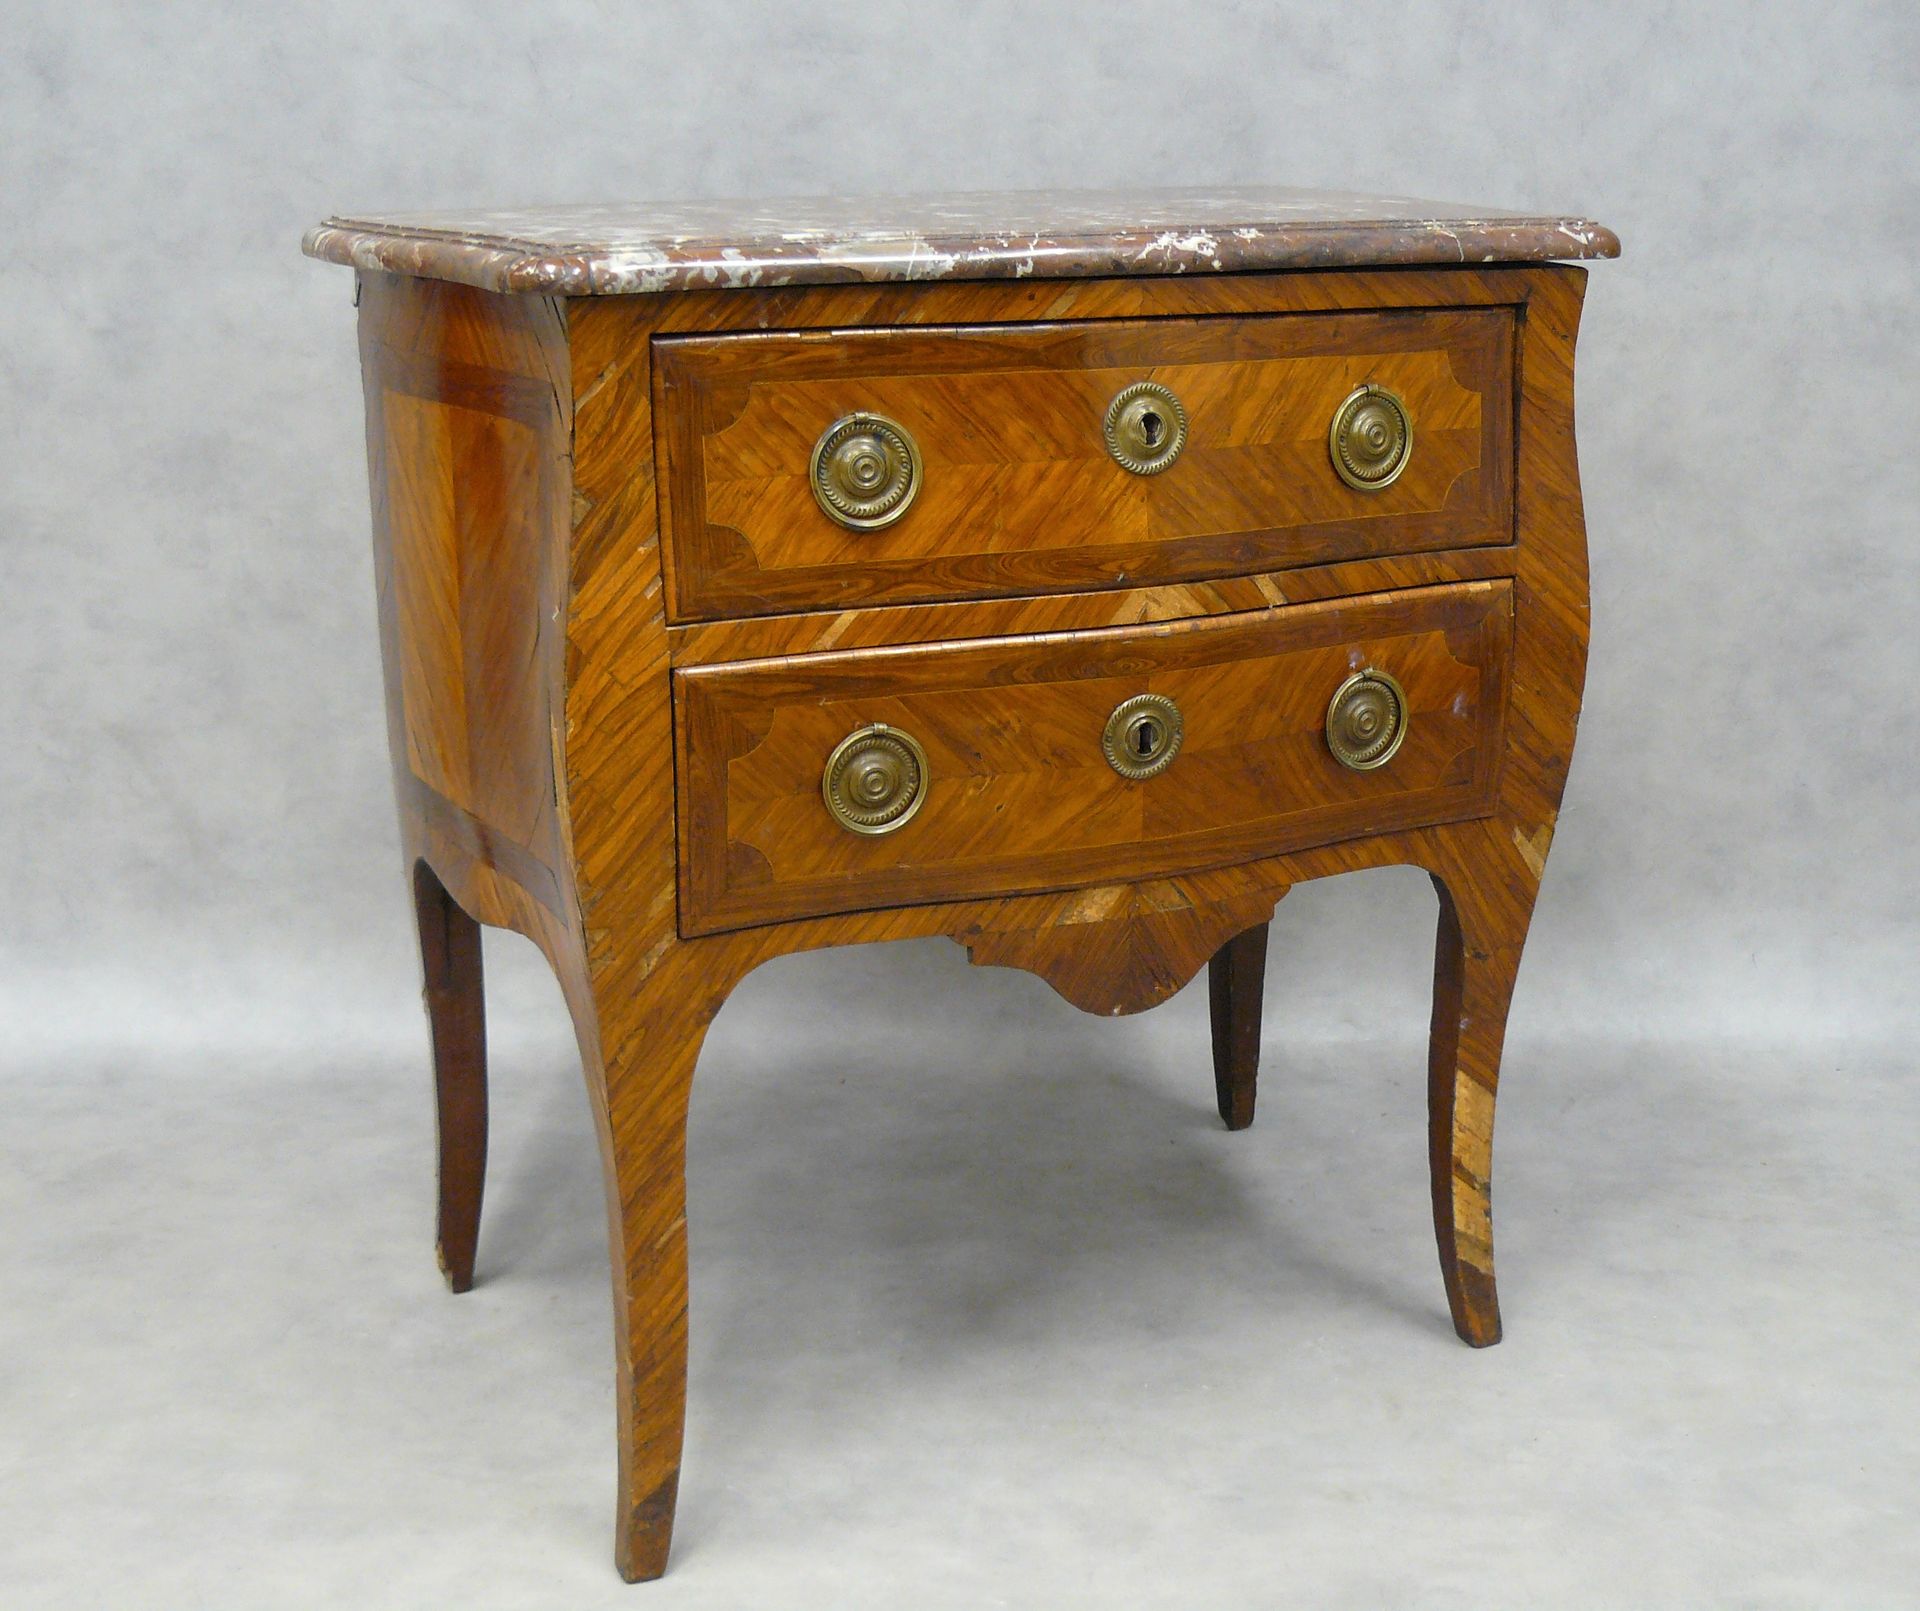 HOLTHAUSEN Jean Holthausen (Me in 1764) : small Louis XV curved chest of drawers&hellip;